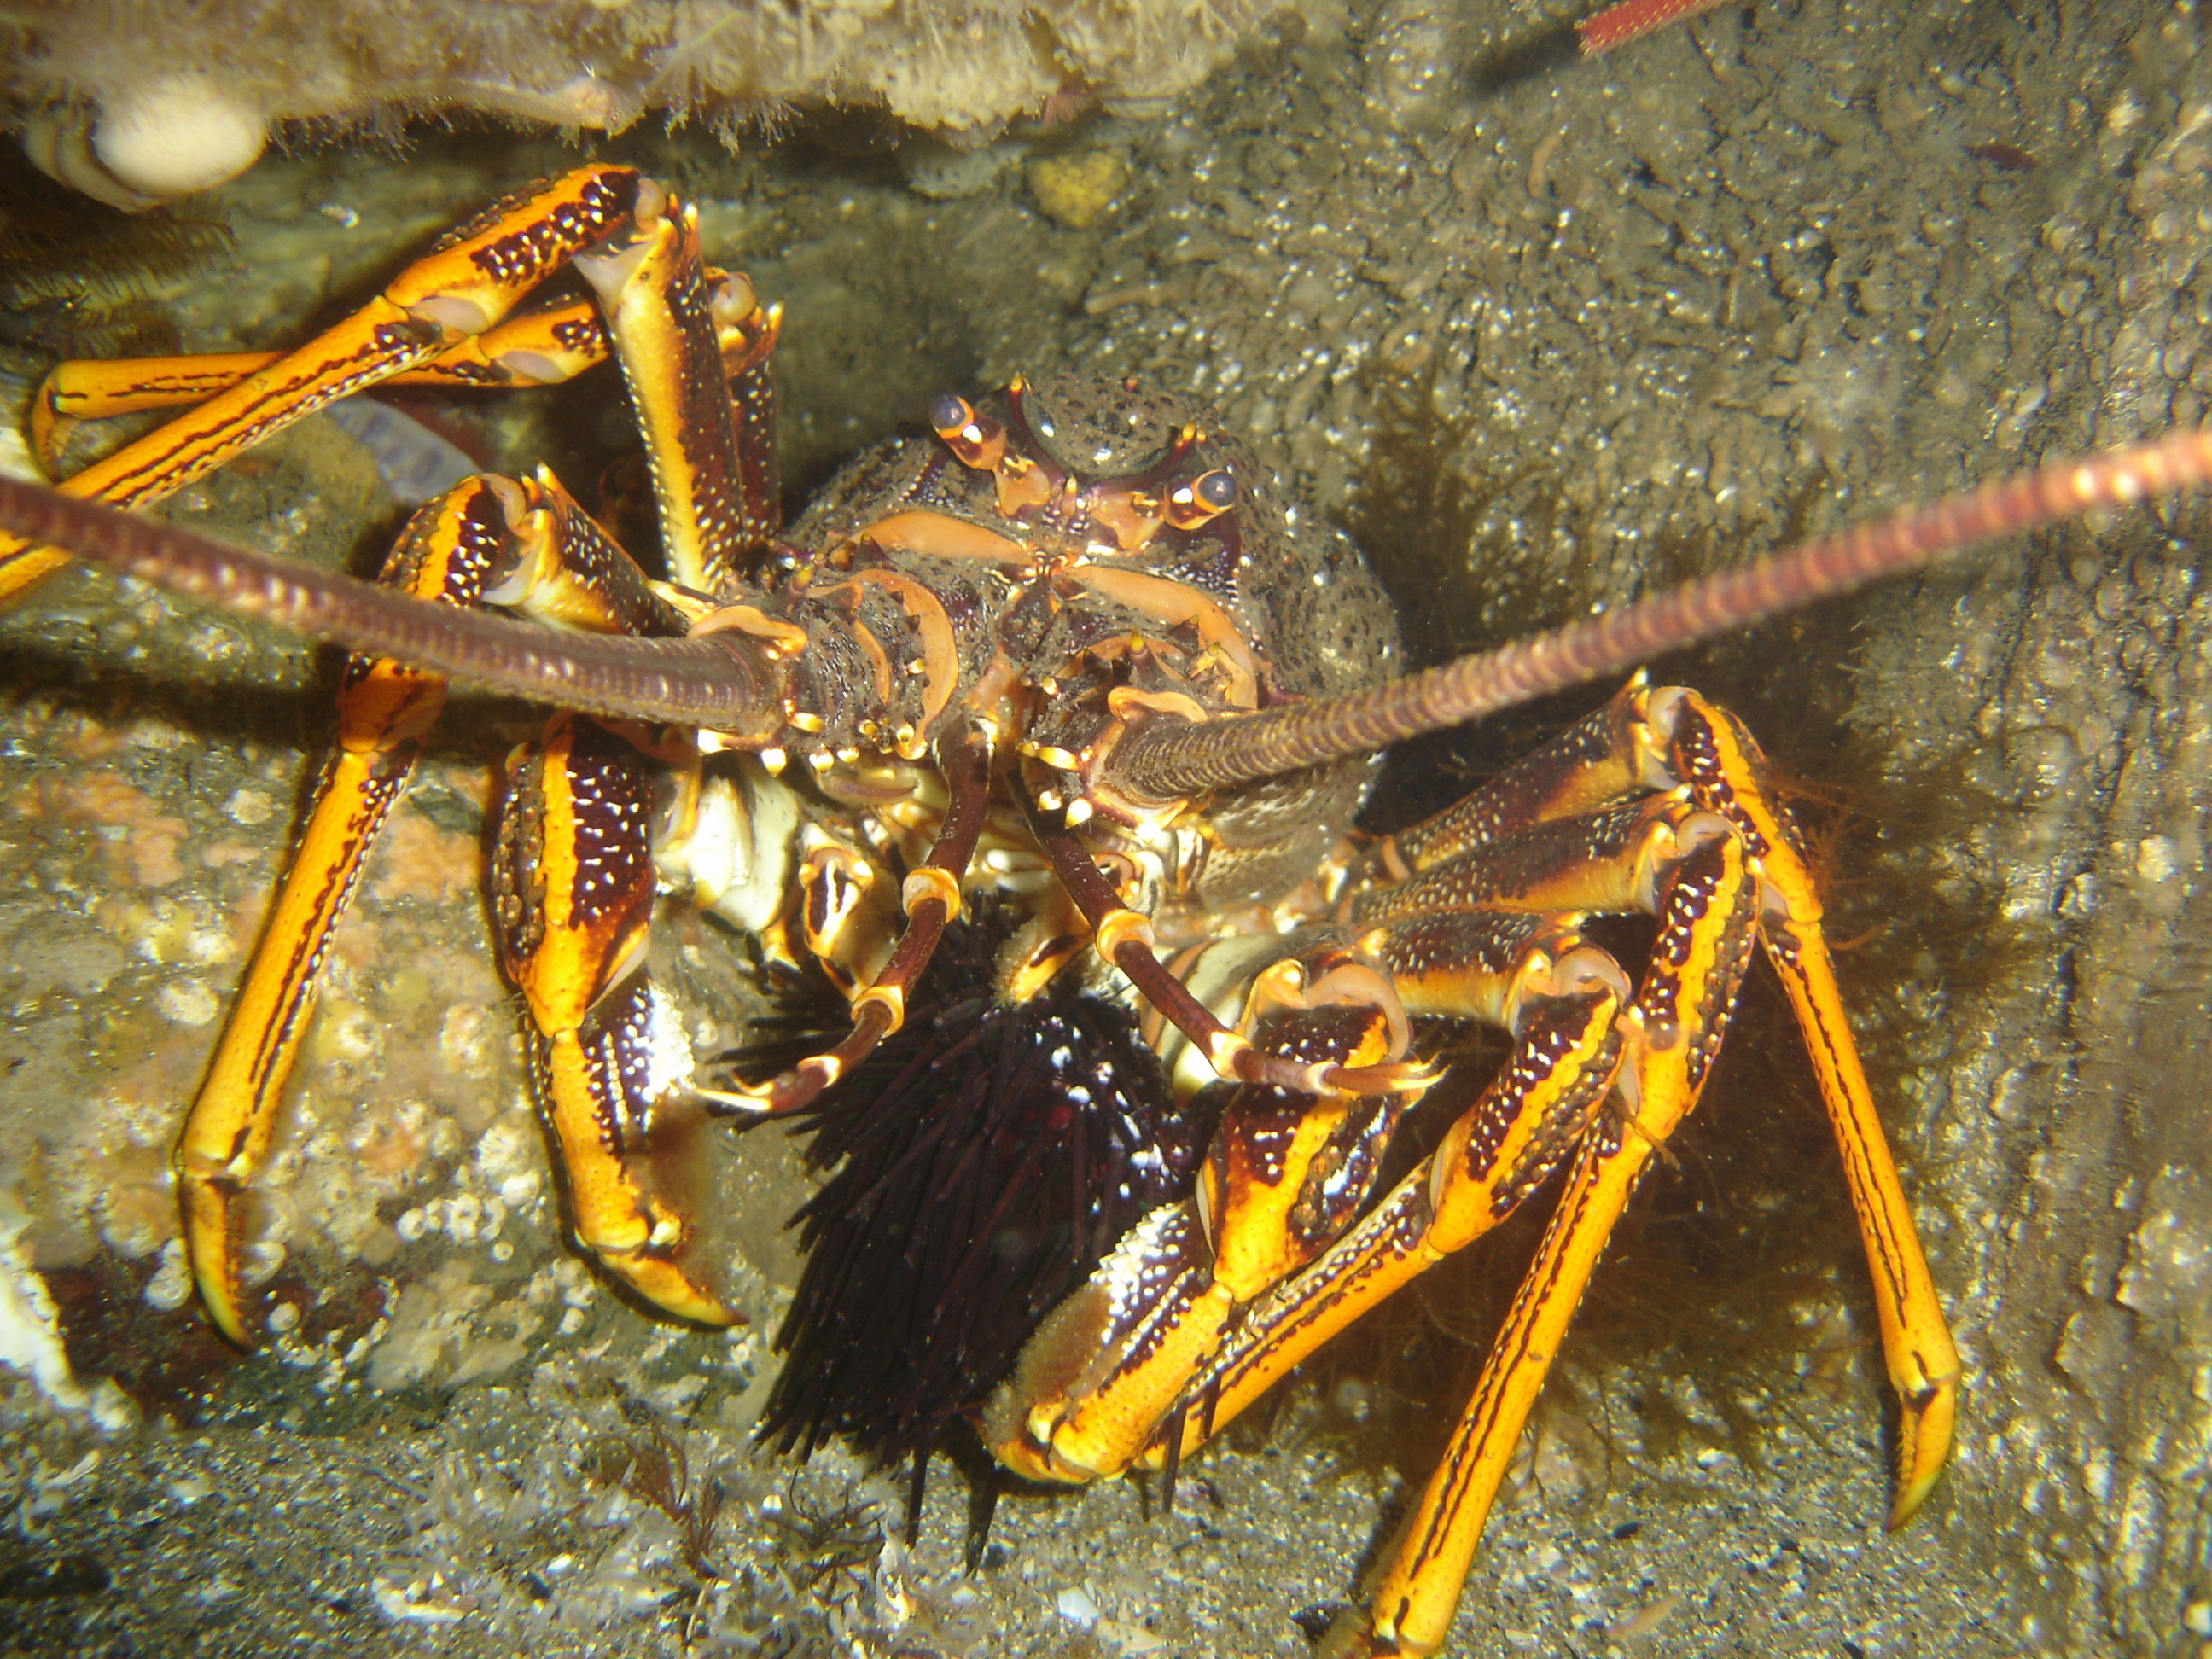 Lobster eating long-spined sea urchin.